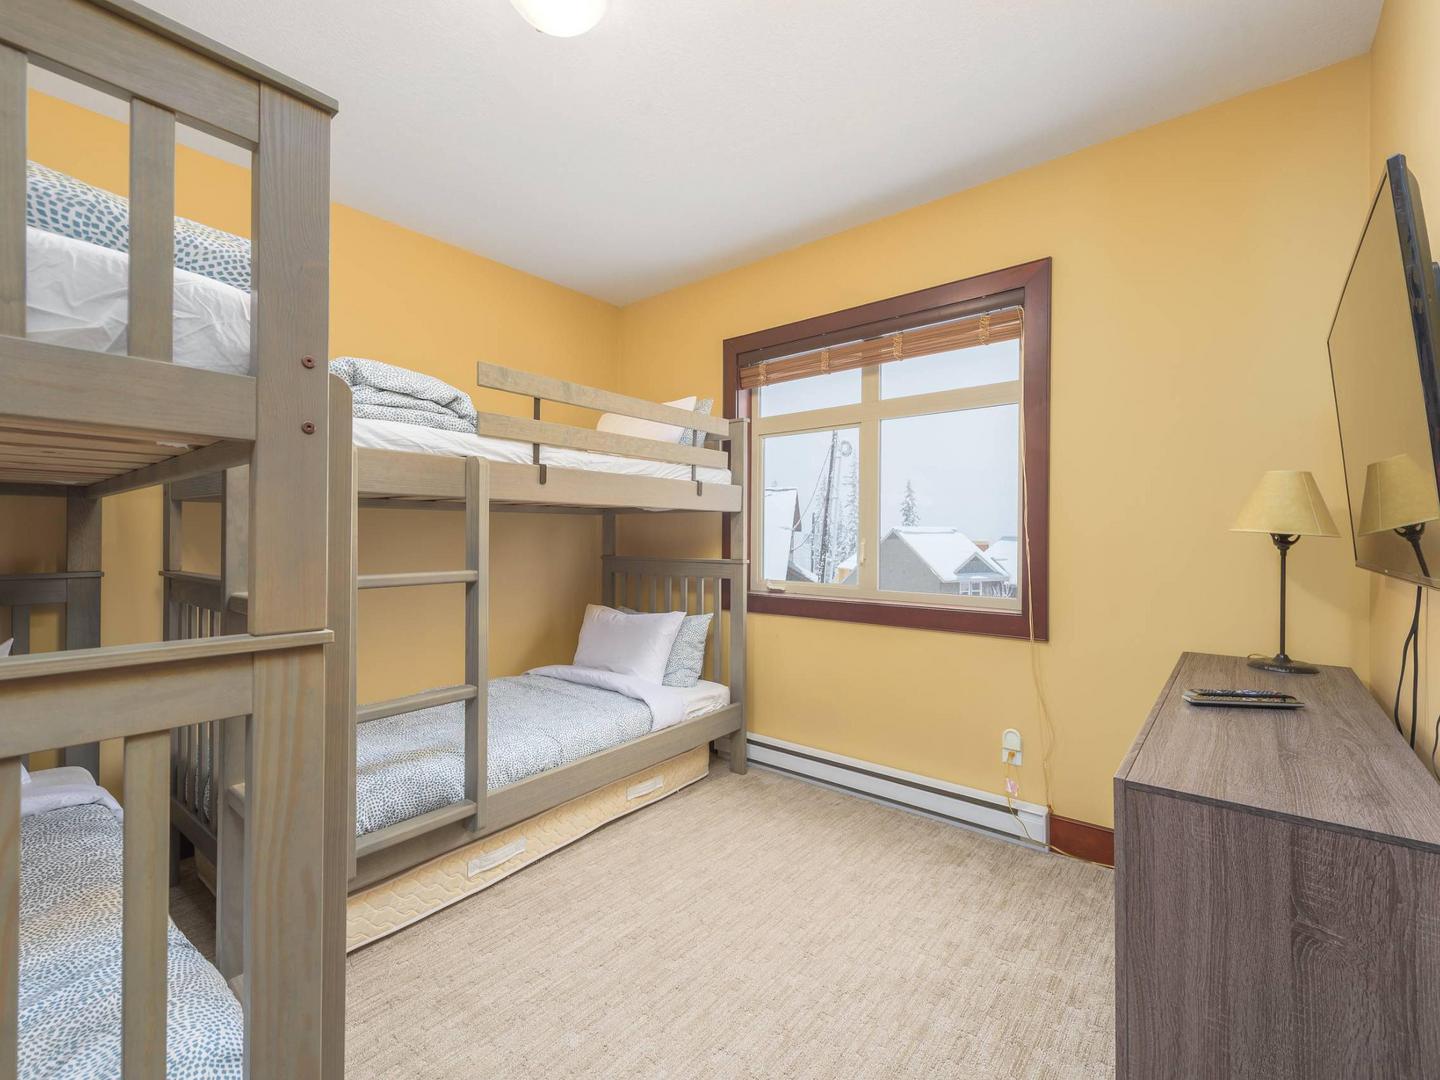 A bedroom with two single bunkbeds, each with two beds, in abrightly lit, cozy bedroom, perfect for the kids, in Aspens #6 luxury vacation rental at Big White Ski Resort.